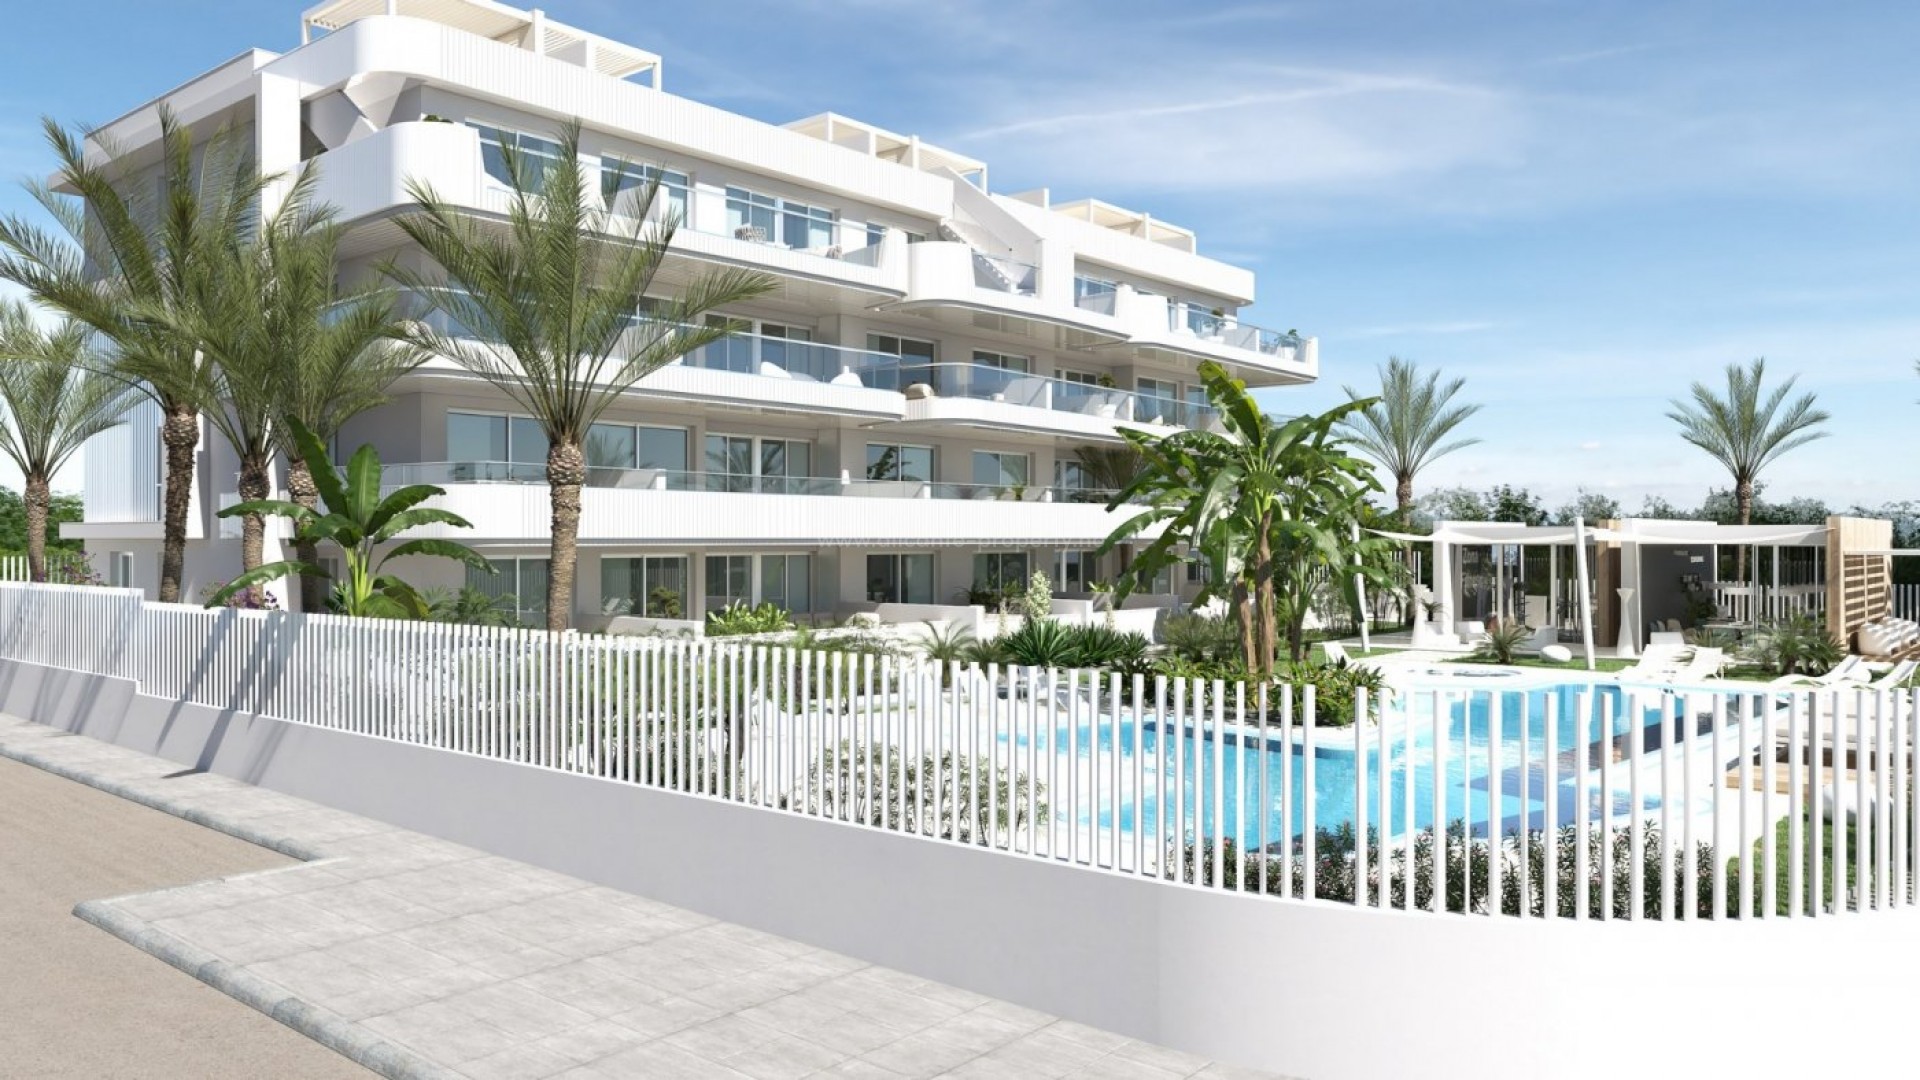 Newly built luxury residential complex in Lomas de Cabo Roig, apartments/penthouses, 2/3 bedrooms, 2 bathrooms, great common areas, large swimming pool